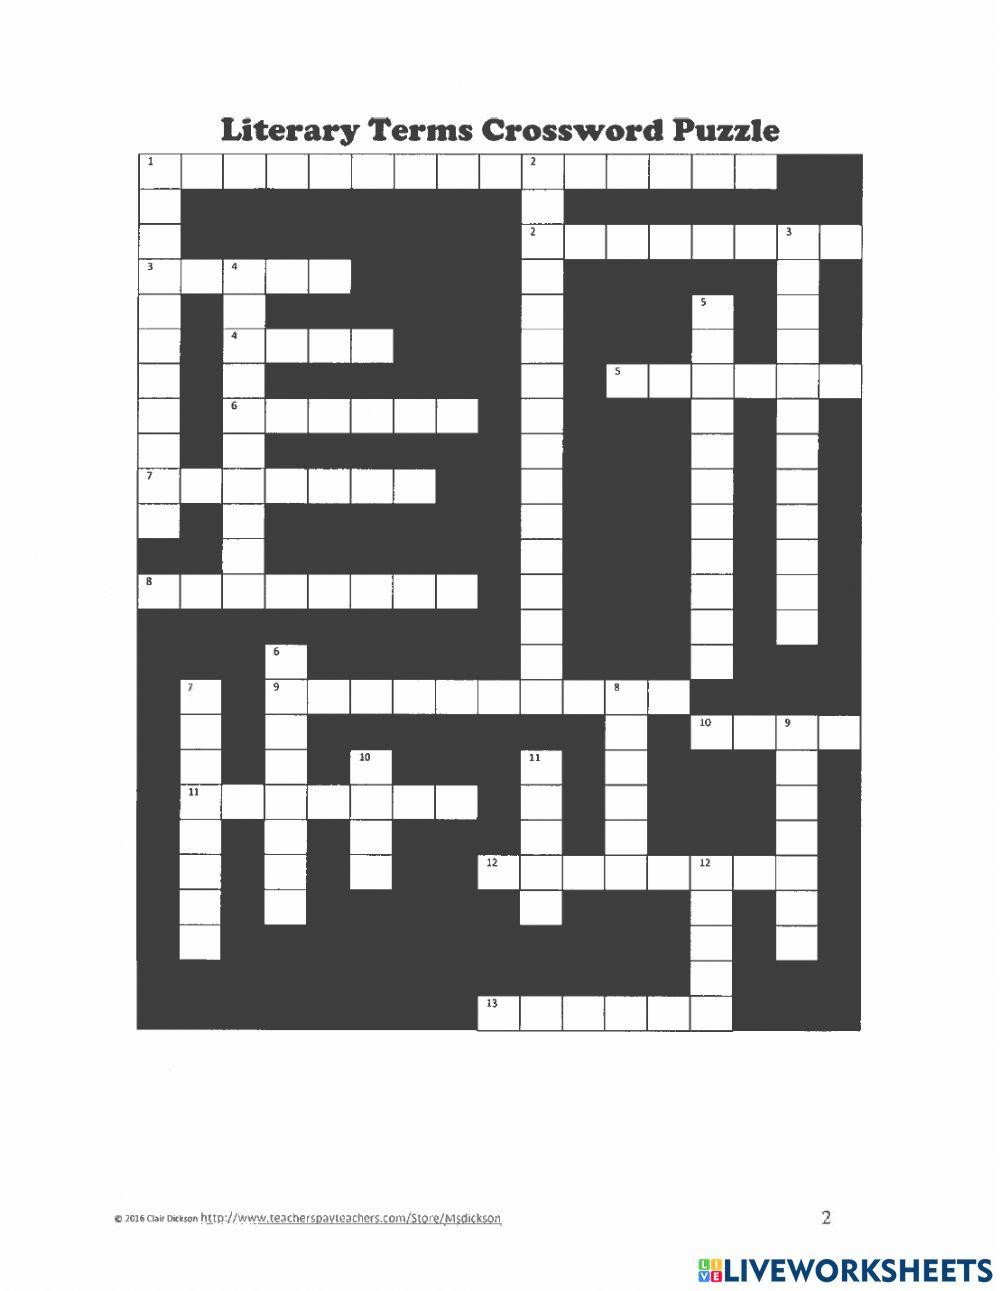 LITERARY TERMS CROSSWORD PUZZLE